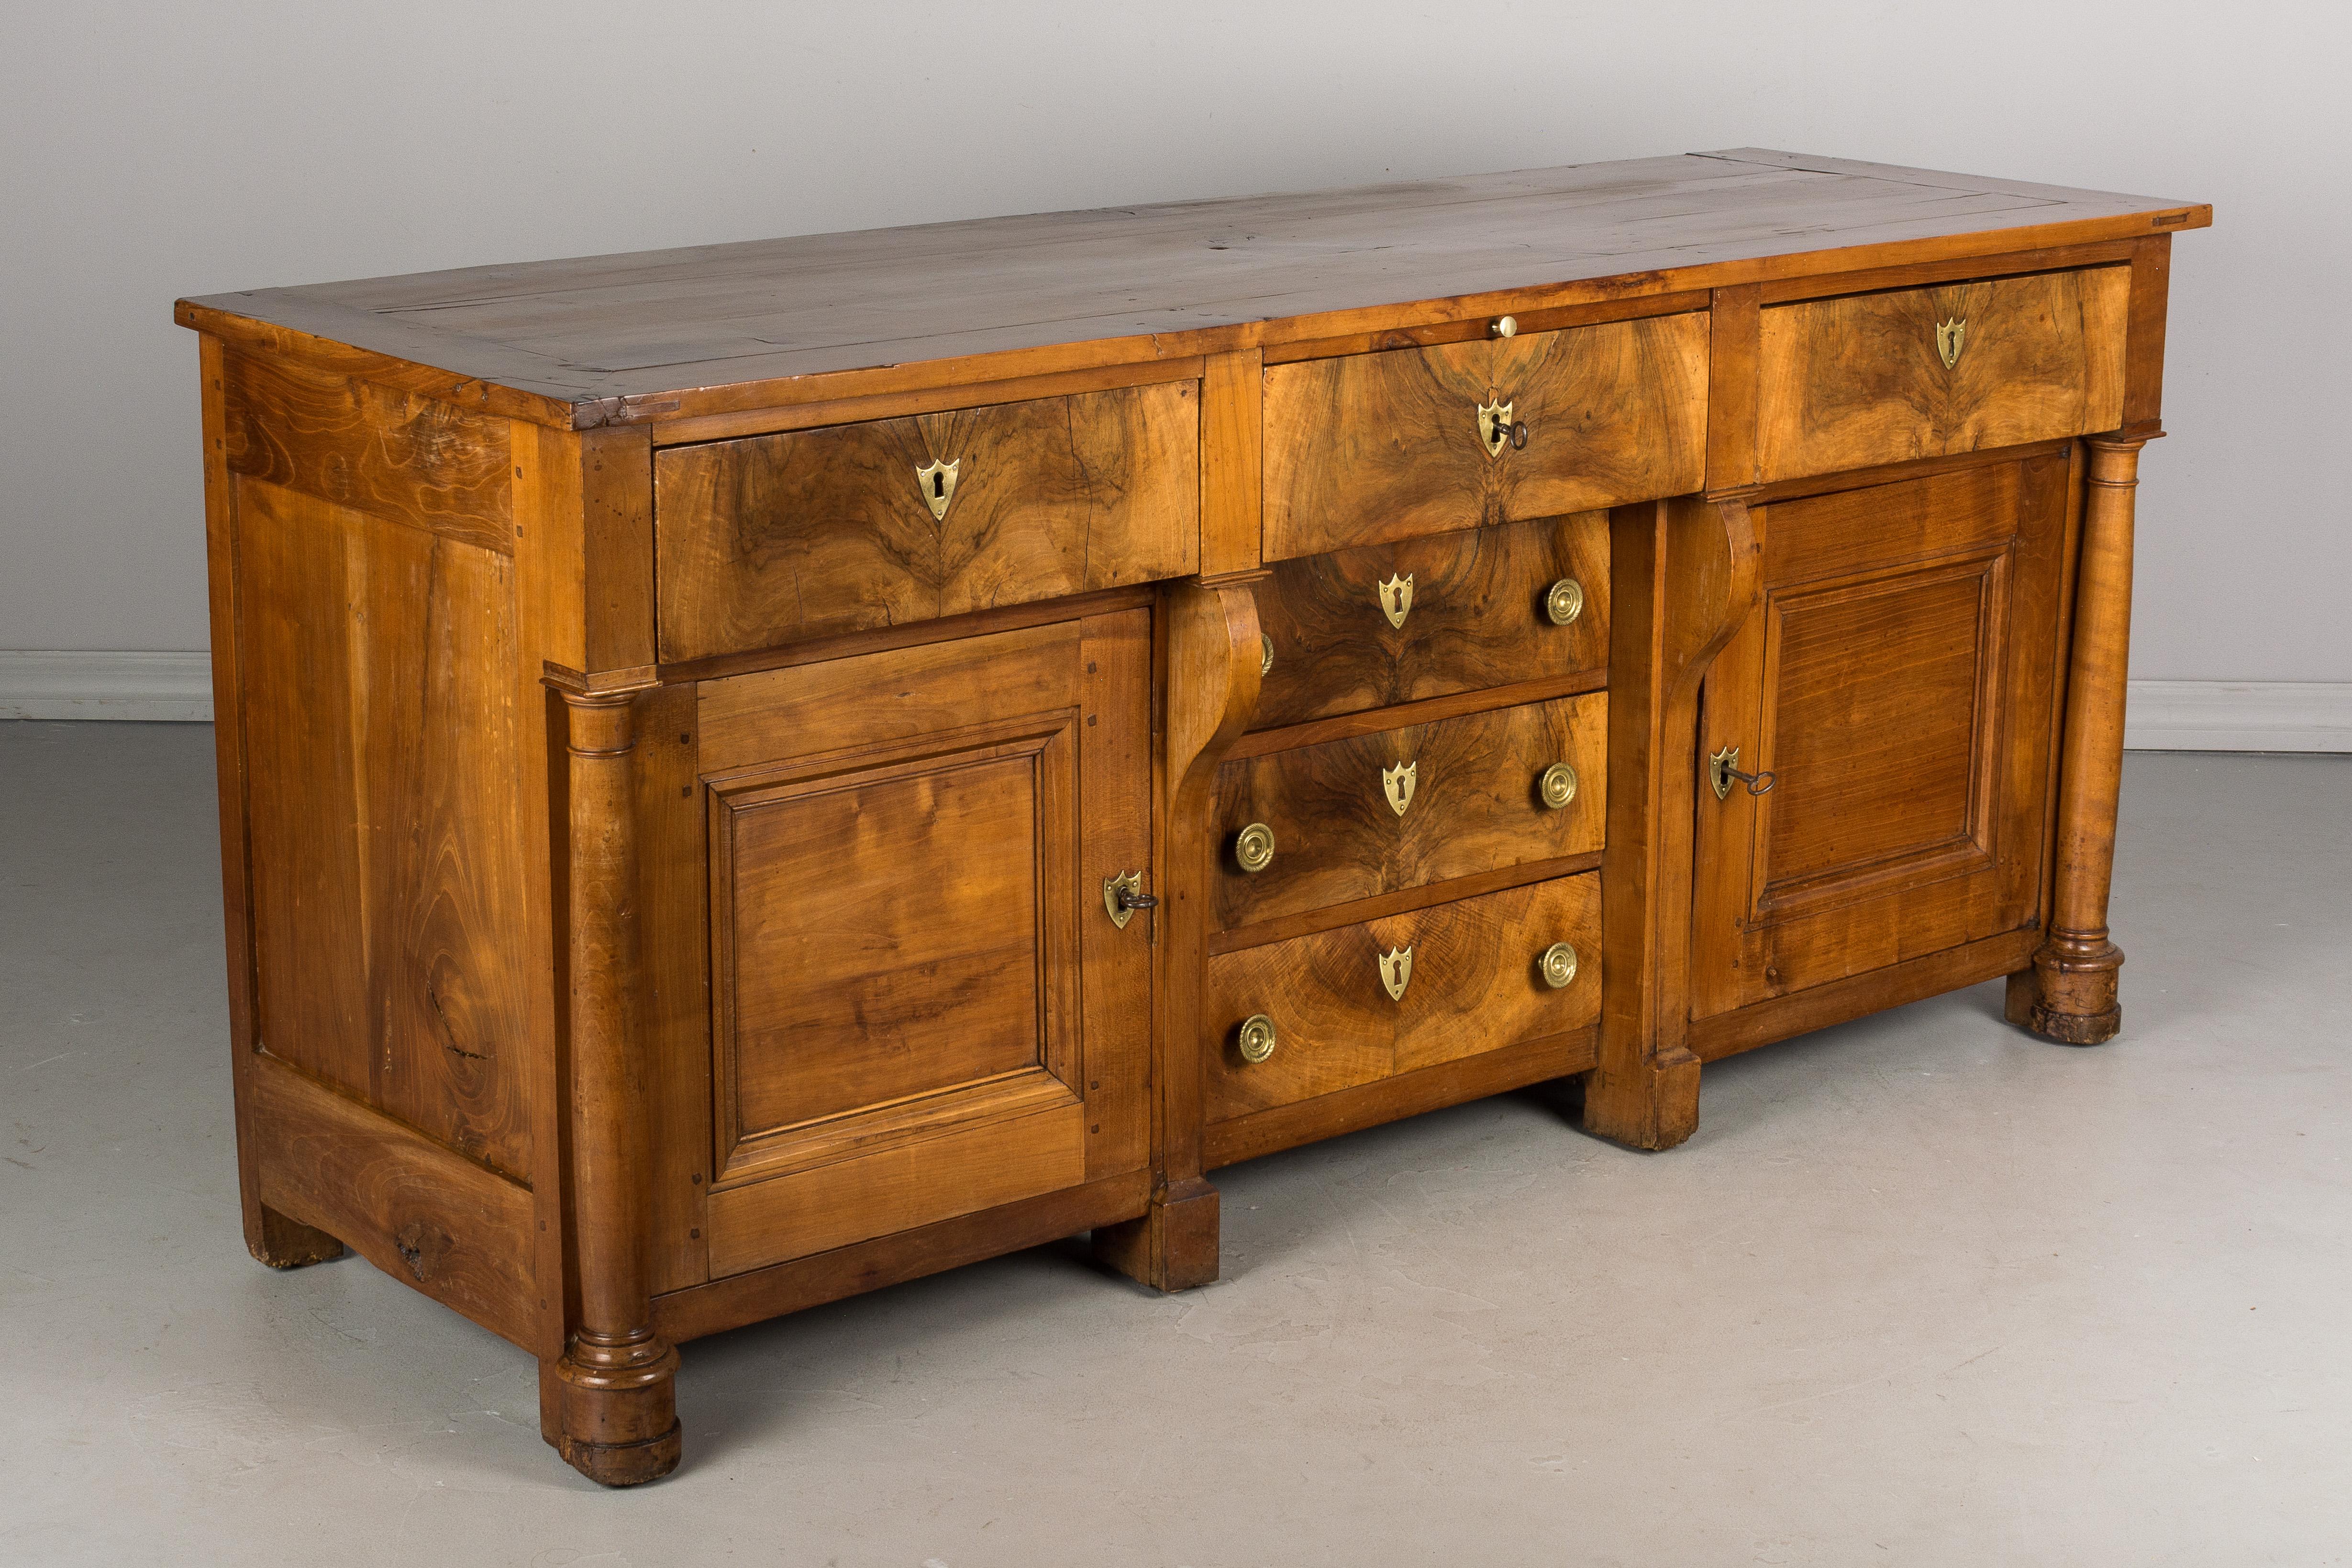 An early 19th century French Empire Period enfilade, or sideboard, made of solid cherry. Six deep dovetailed drawers faced with 1/4 inch thick book-matched walnut veneer. Solid cherry panel doors on either side flanked by turned columns. Pull-out